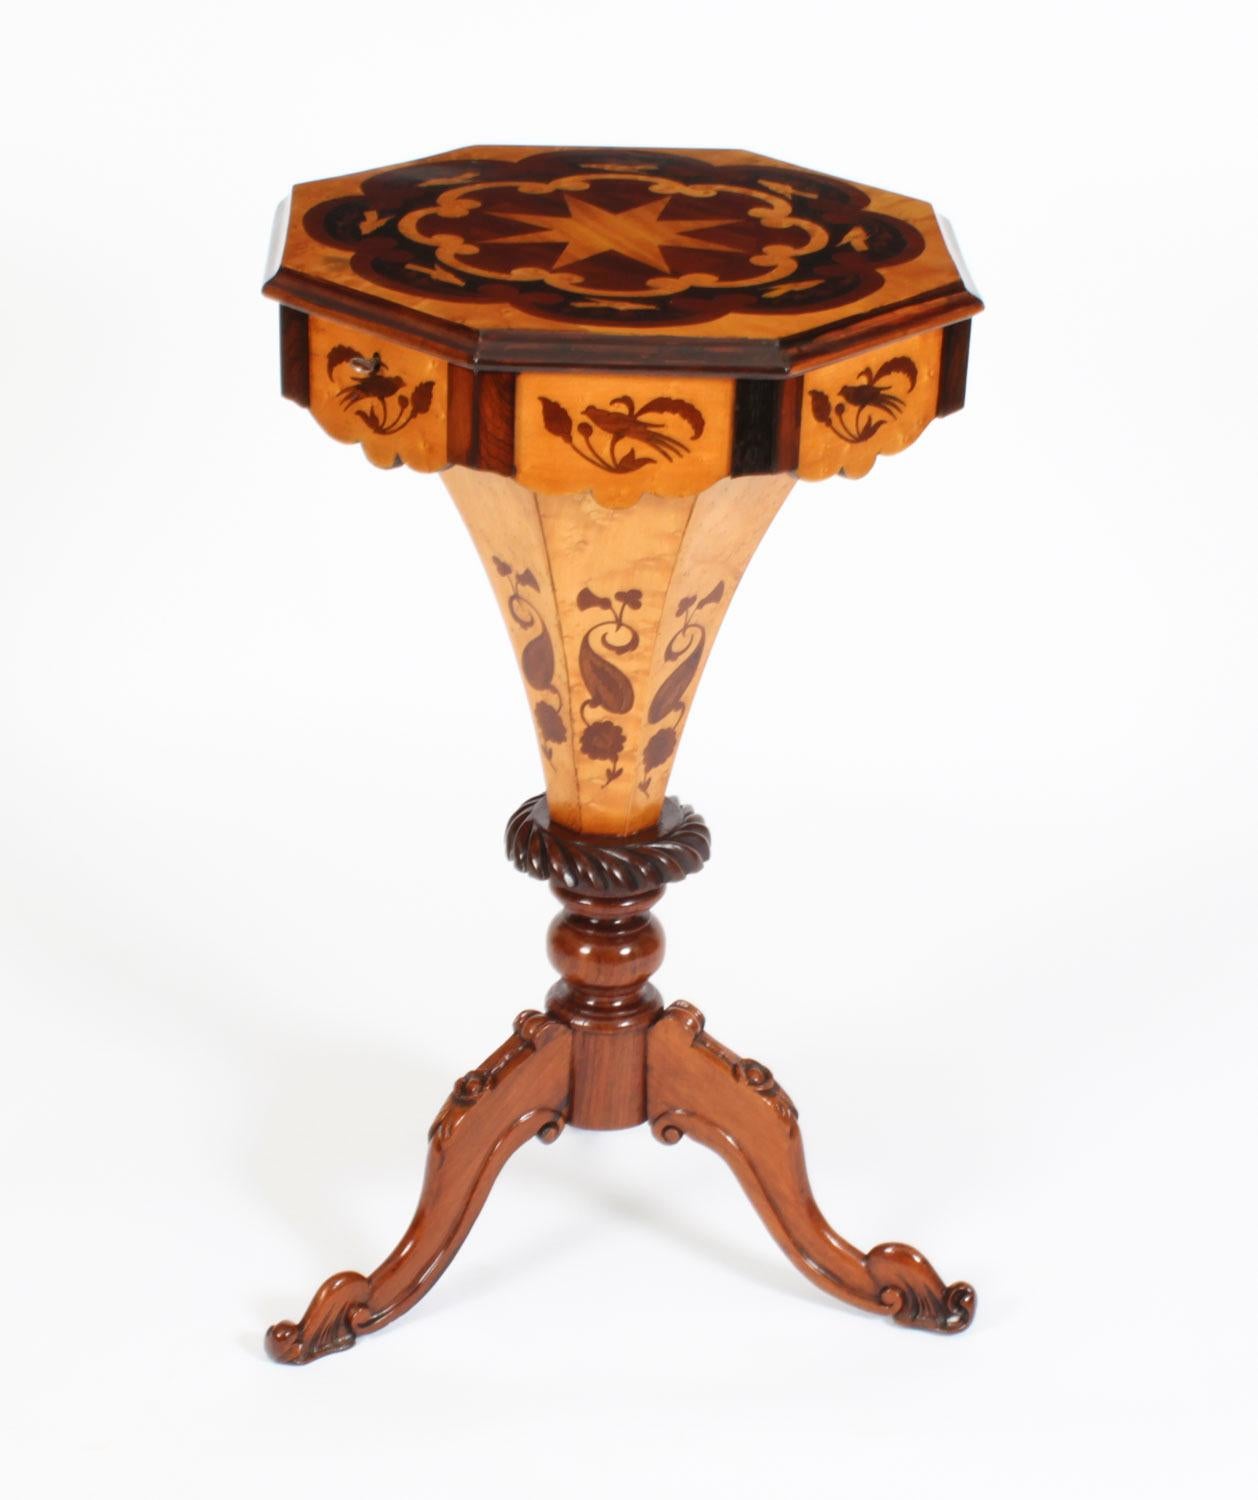 A superb burr walnut and birdseye maple marquetry work / sewing table, Circa 1860 in date

The ornately floral marquetry inlaid octagonal hinged top with a central star motif within borders of confronting scrollwork and birds, the cover underside